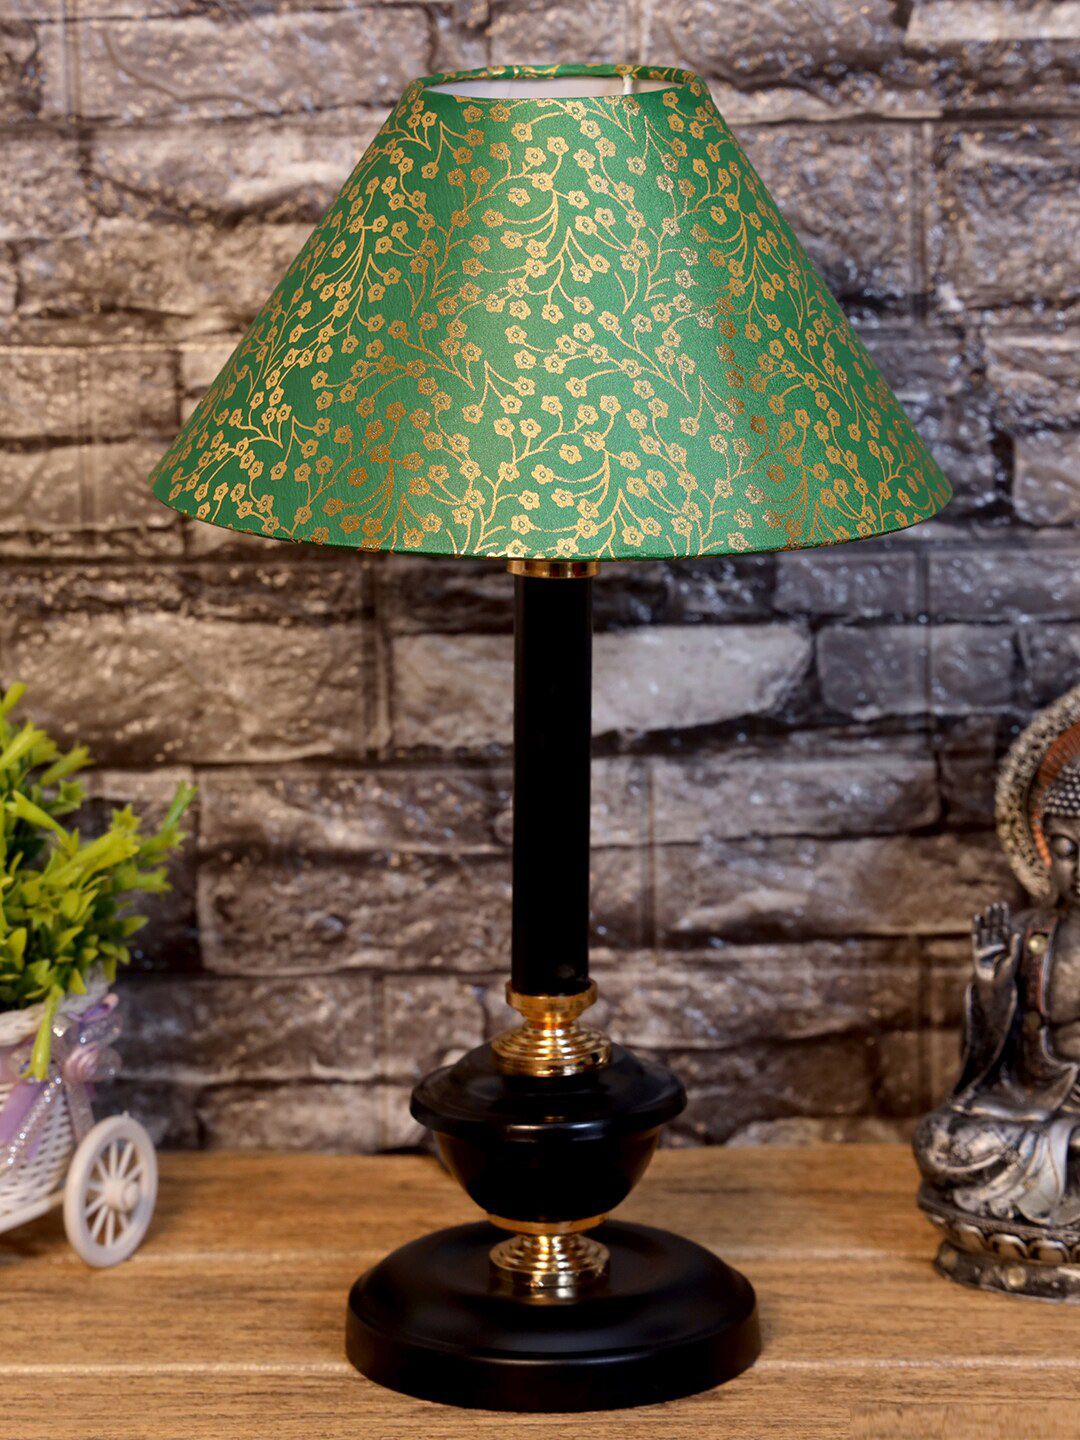 foziq Adults Black & Green Printed Table Lamp With Shade Price in India